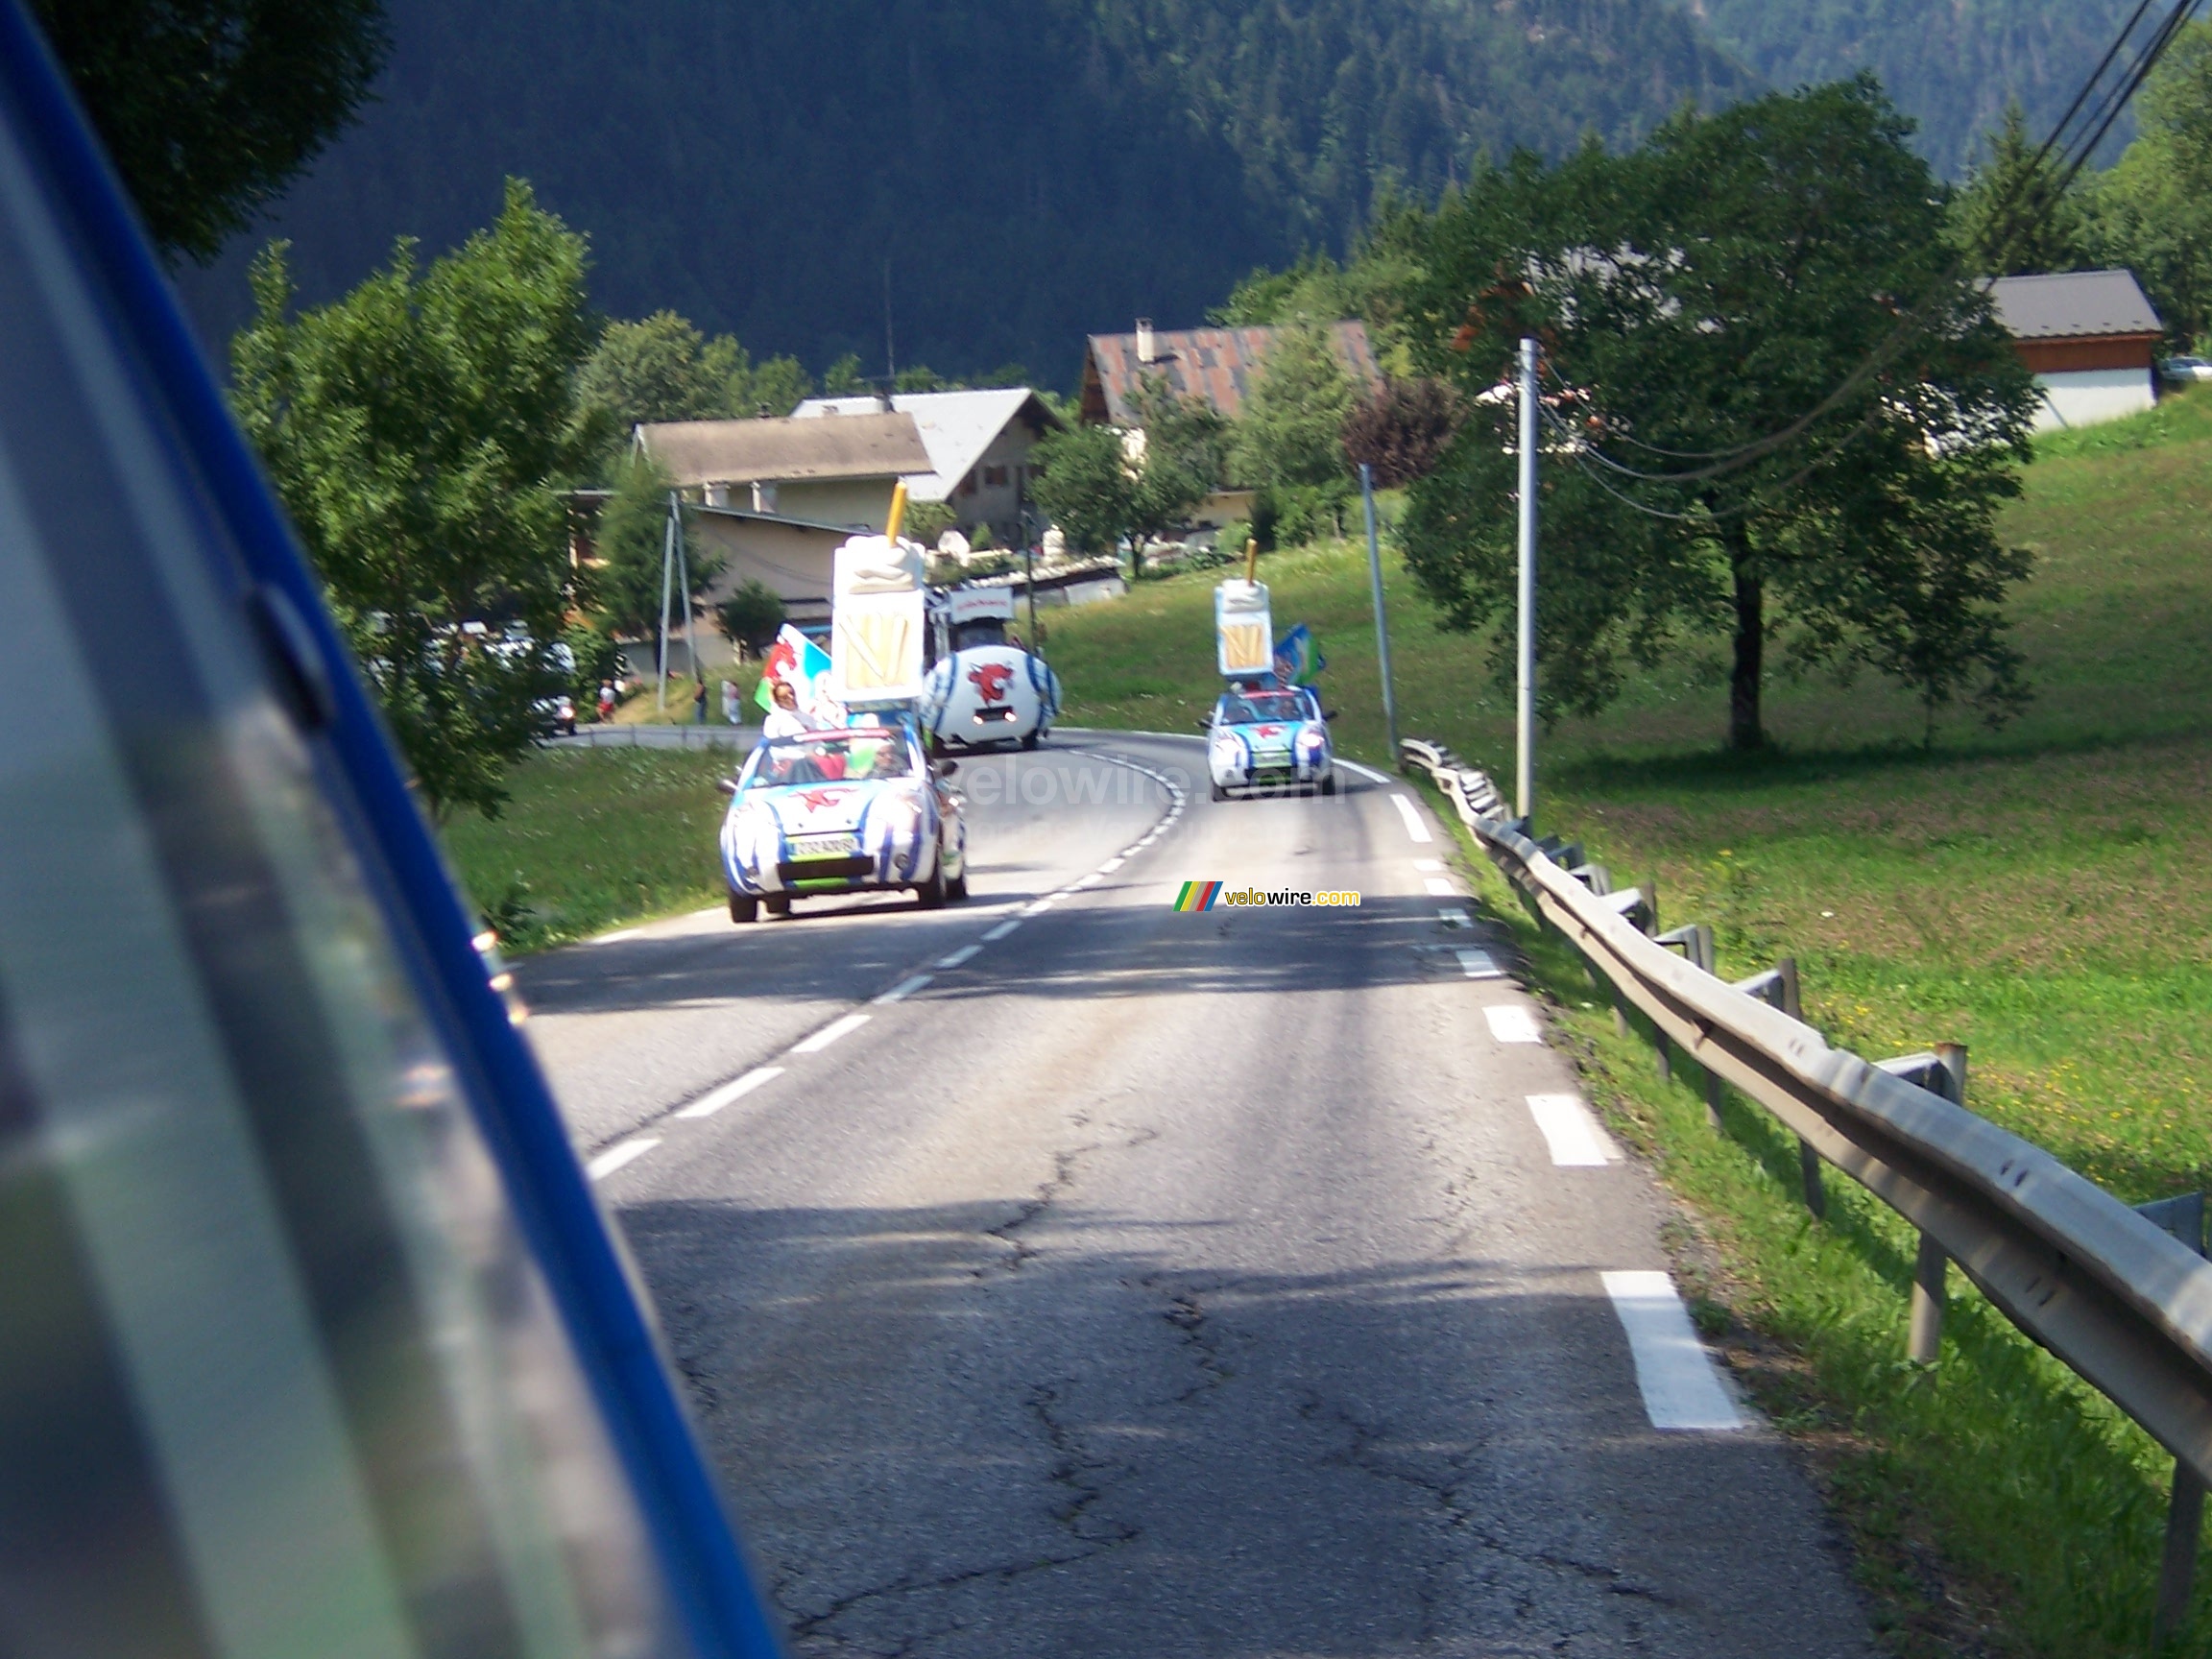 The cars are now behind us - [1 day in the La Vache Qui Rit 